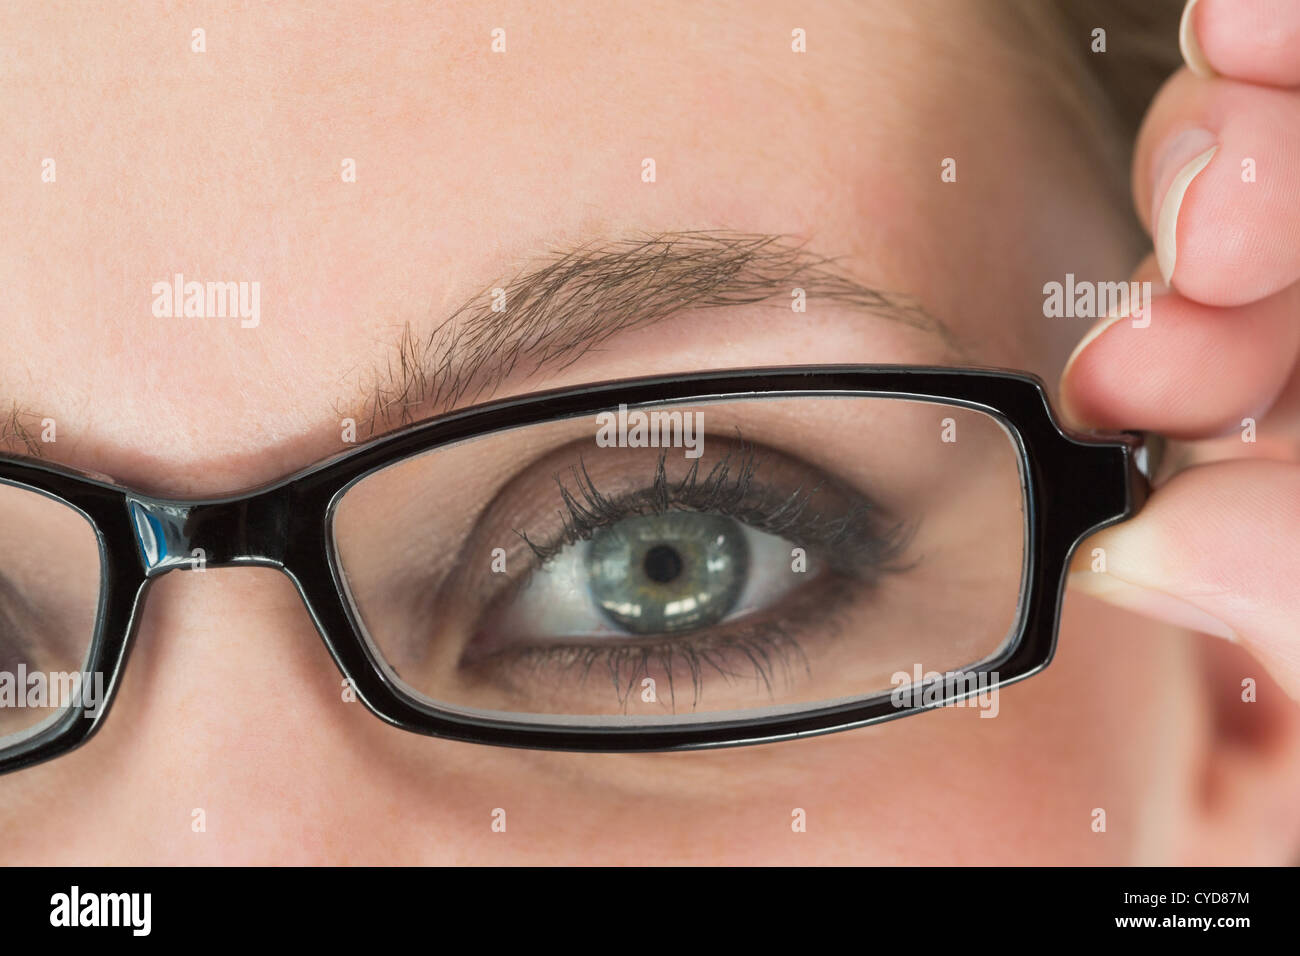 Green eyed woman with glasses Stock Photo